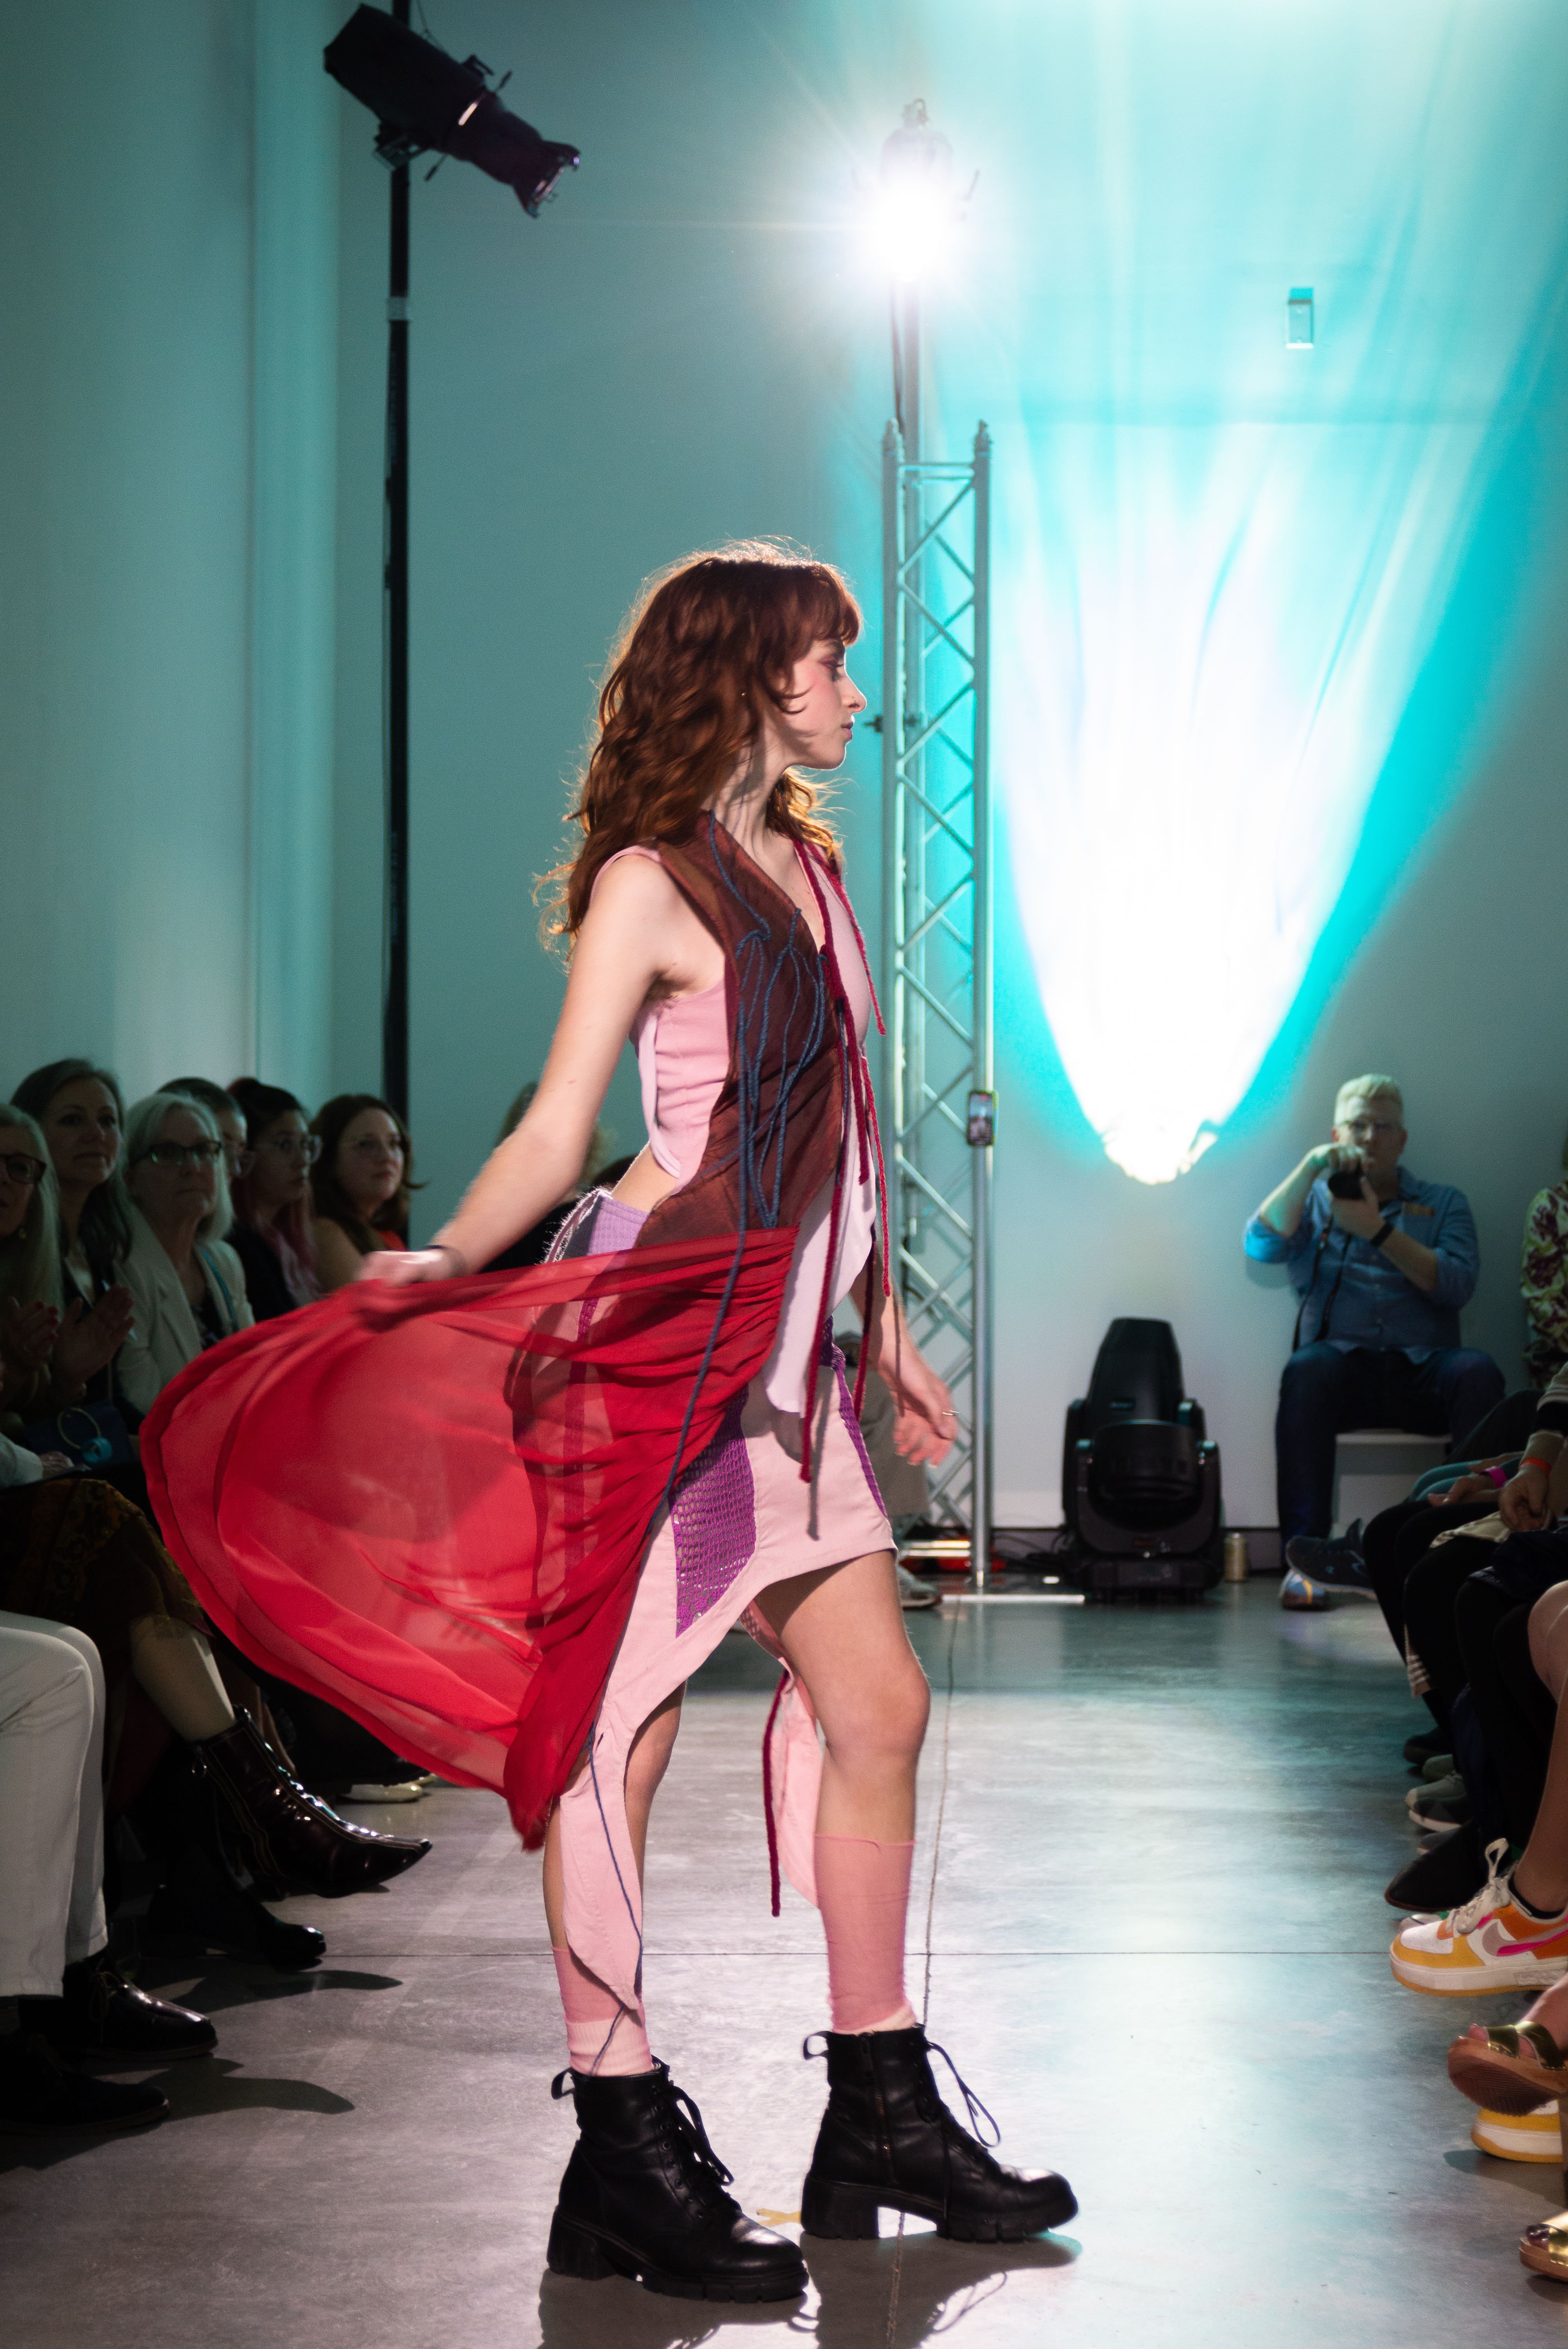 A model on the runway wearing an asymmetrical dress with dangling flesh-colored fabrics.